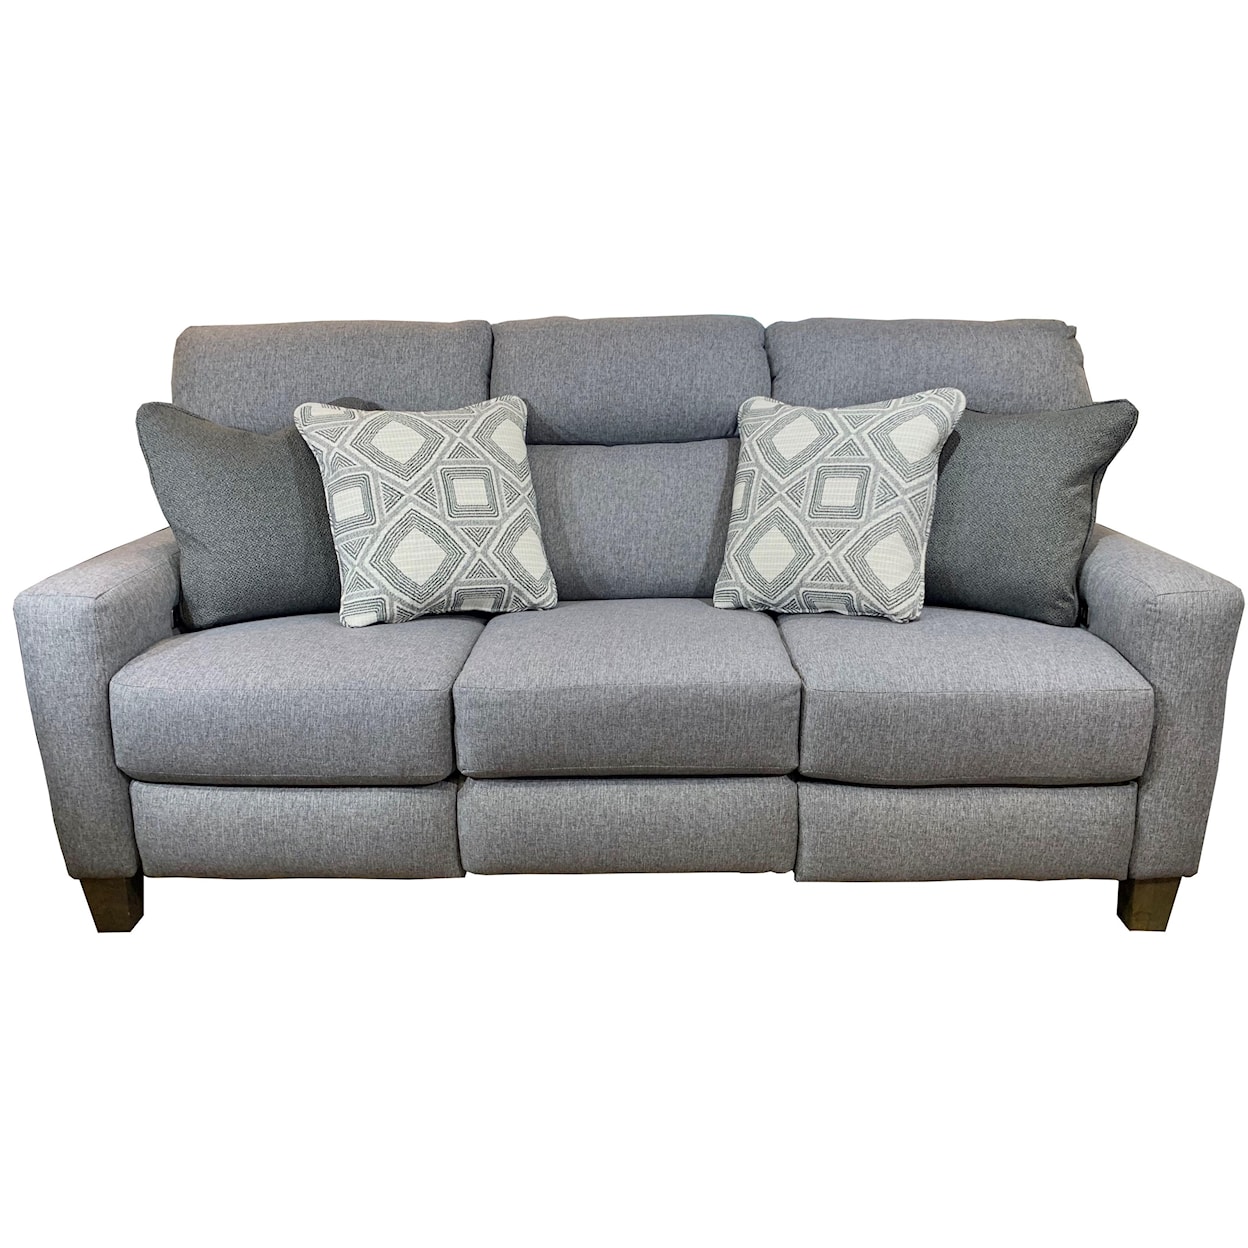 Southern Motion Mt. Vernon Power Headrest Sofa with Pillows